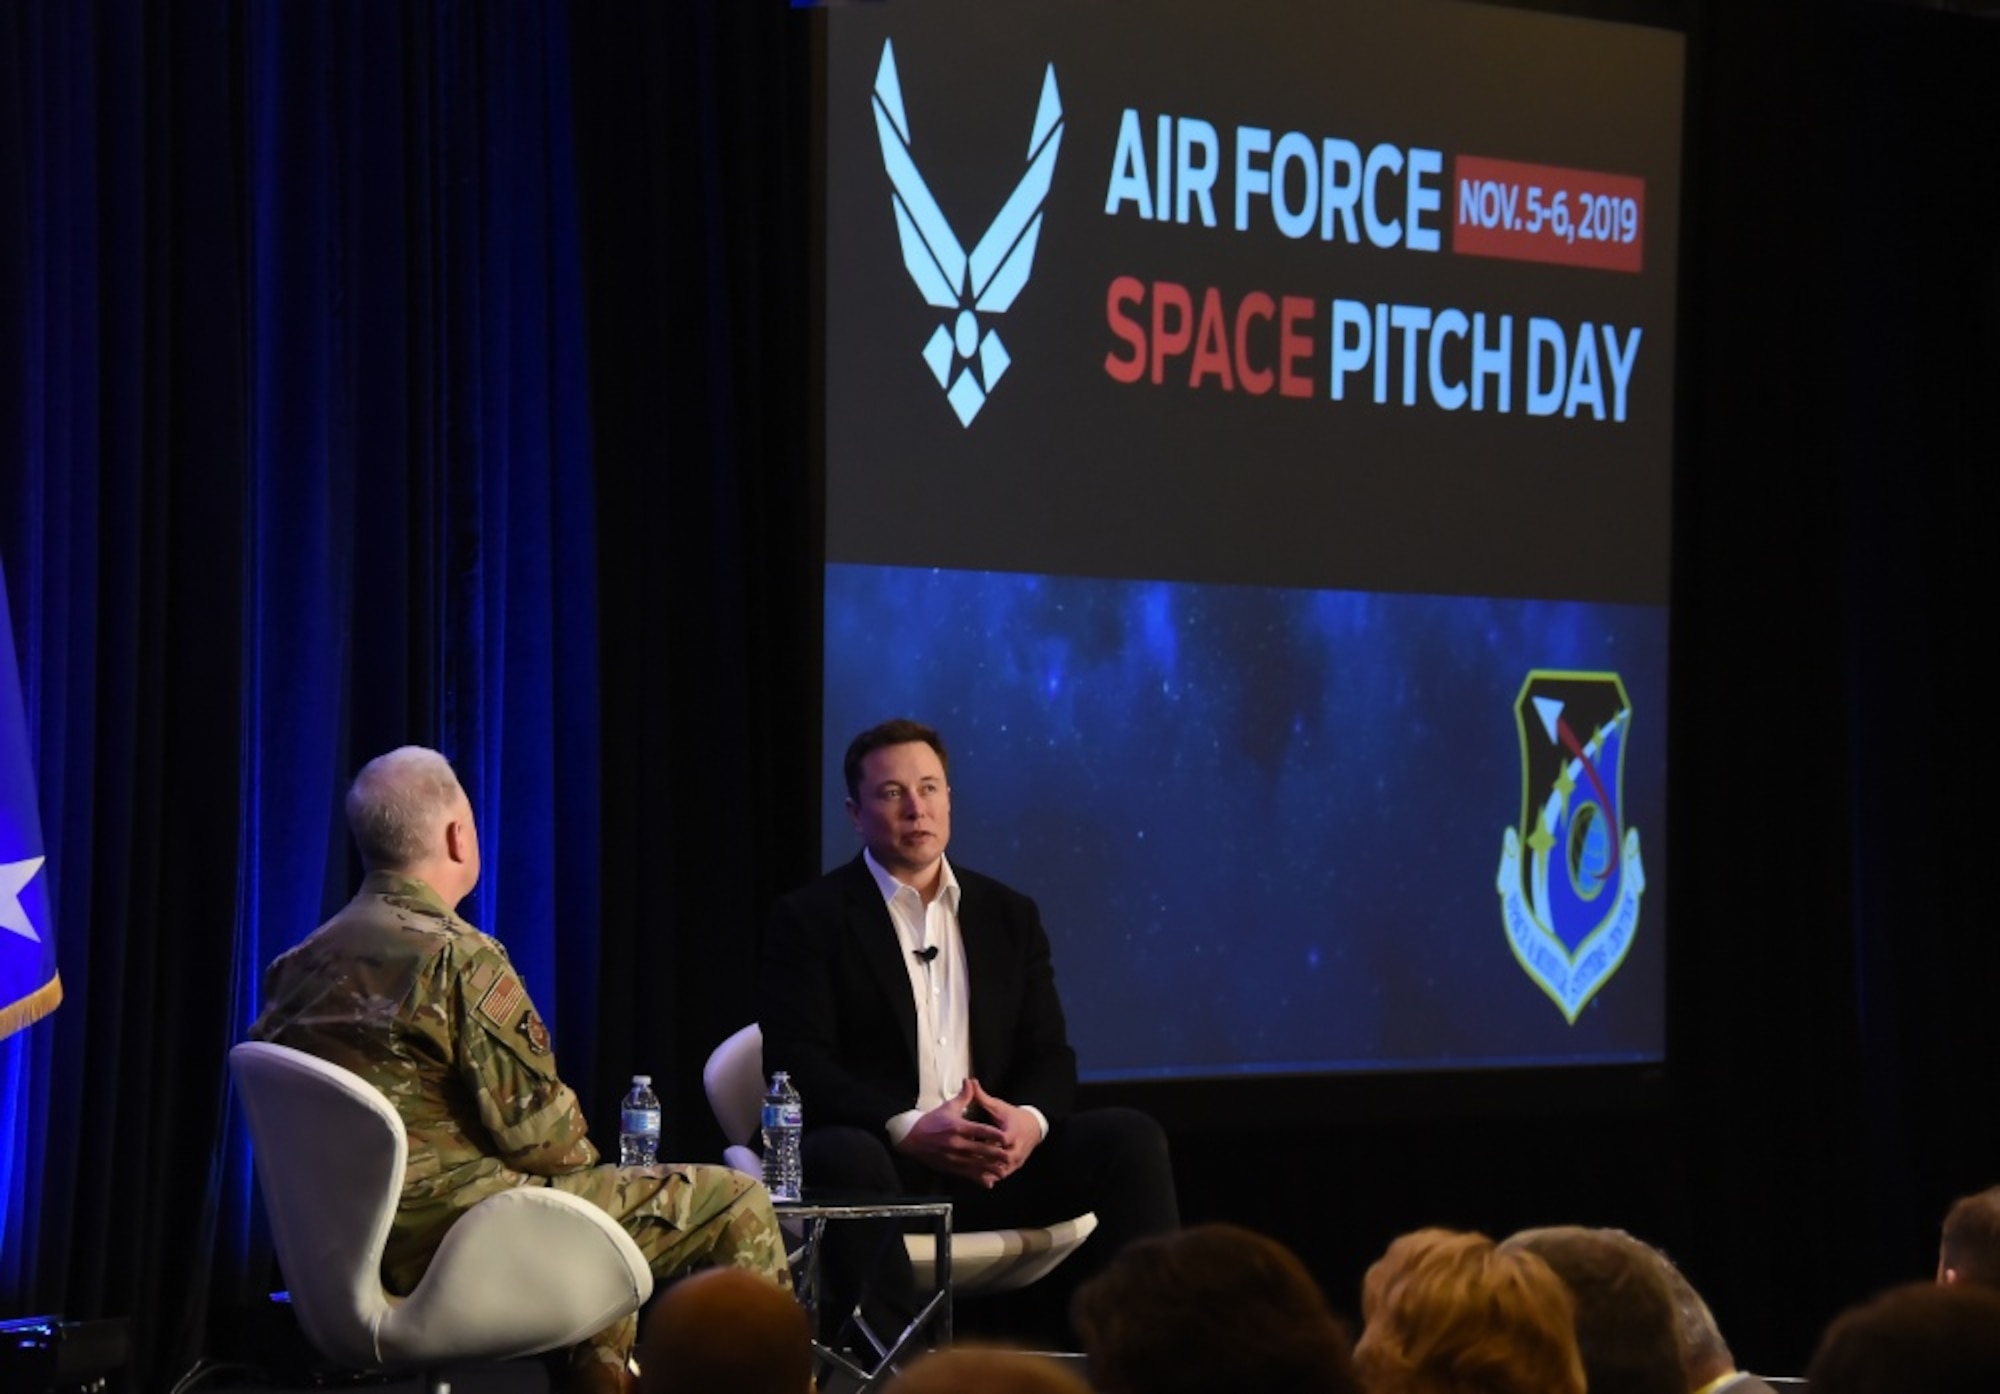 Space Pitch Day